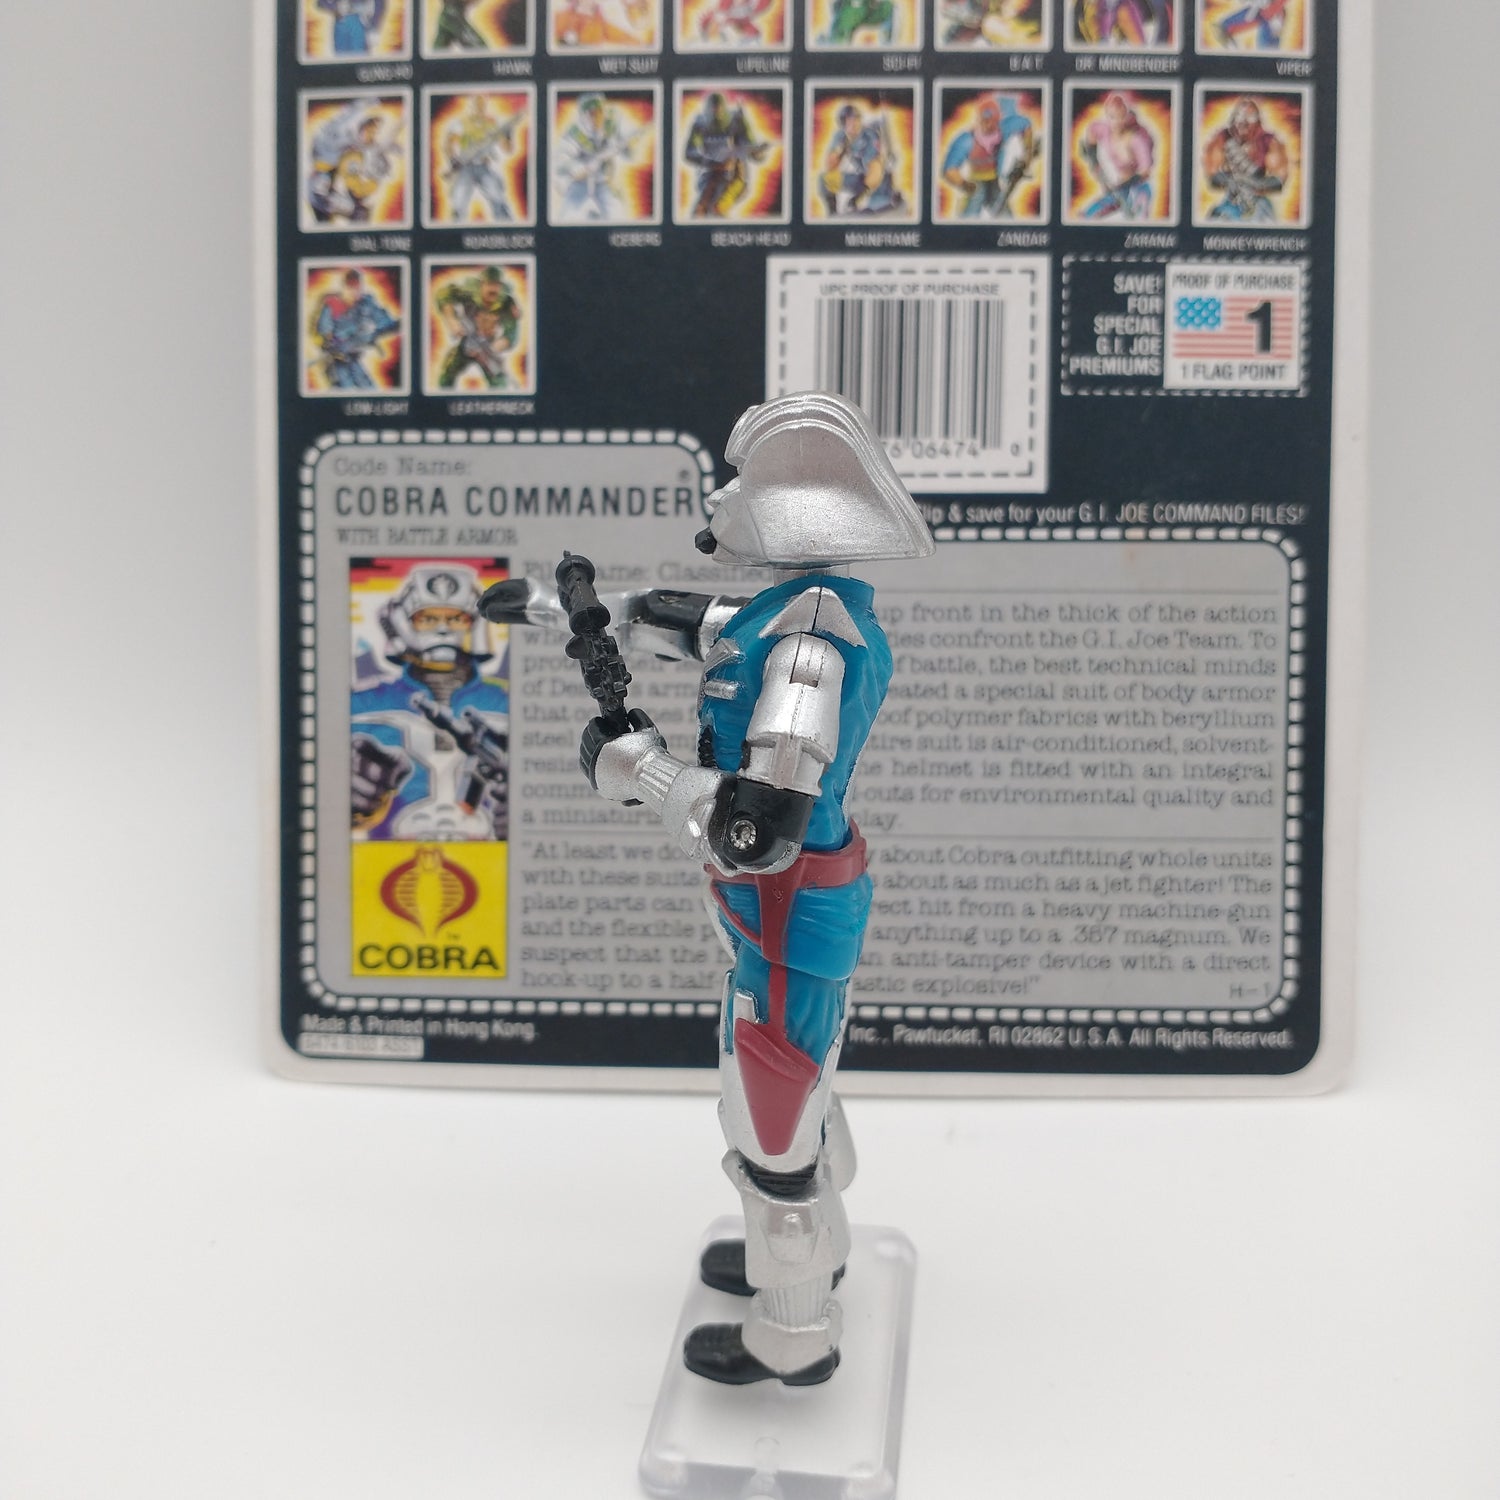 The action figure from the right side